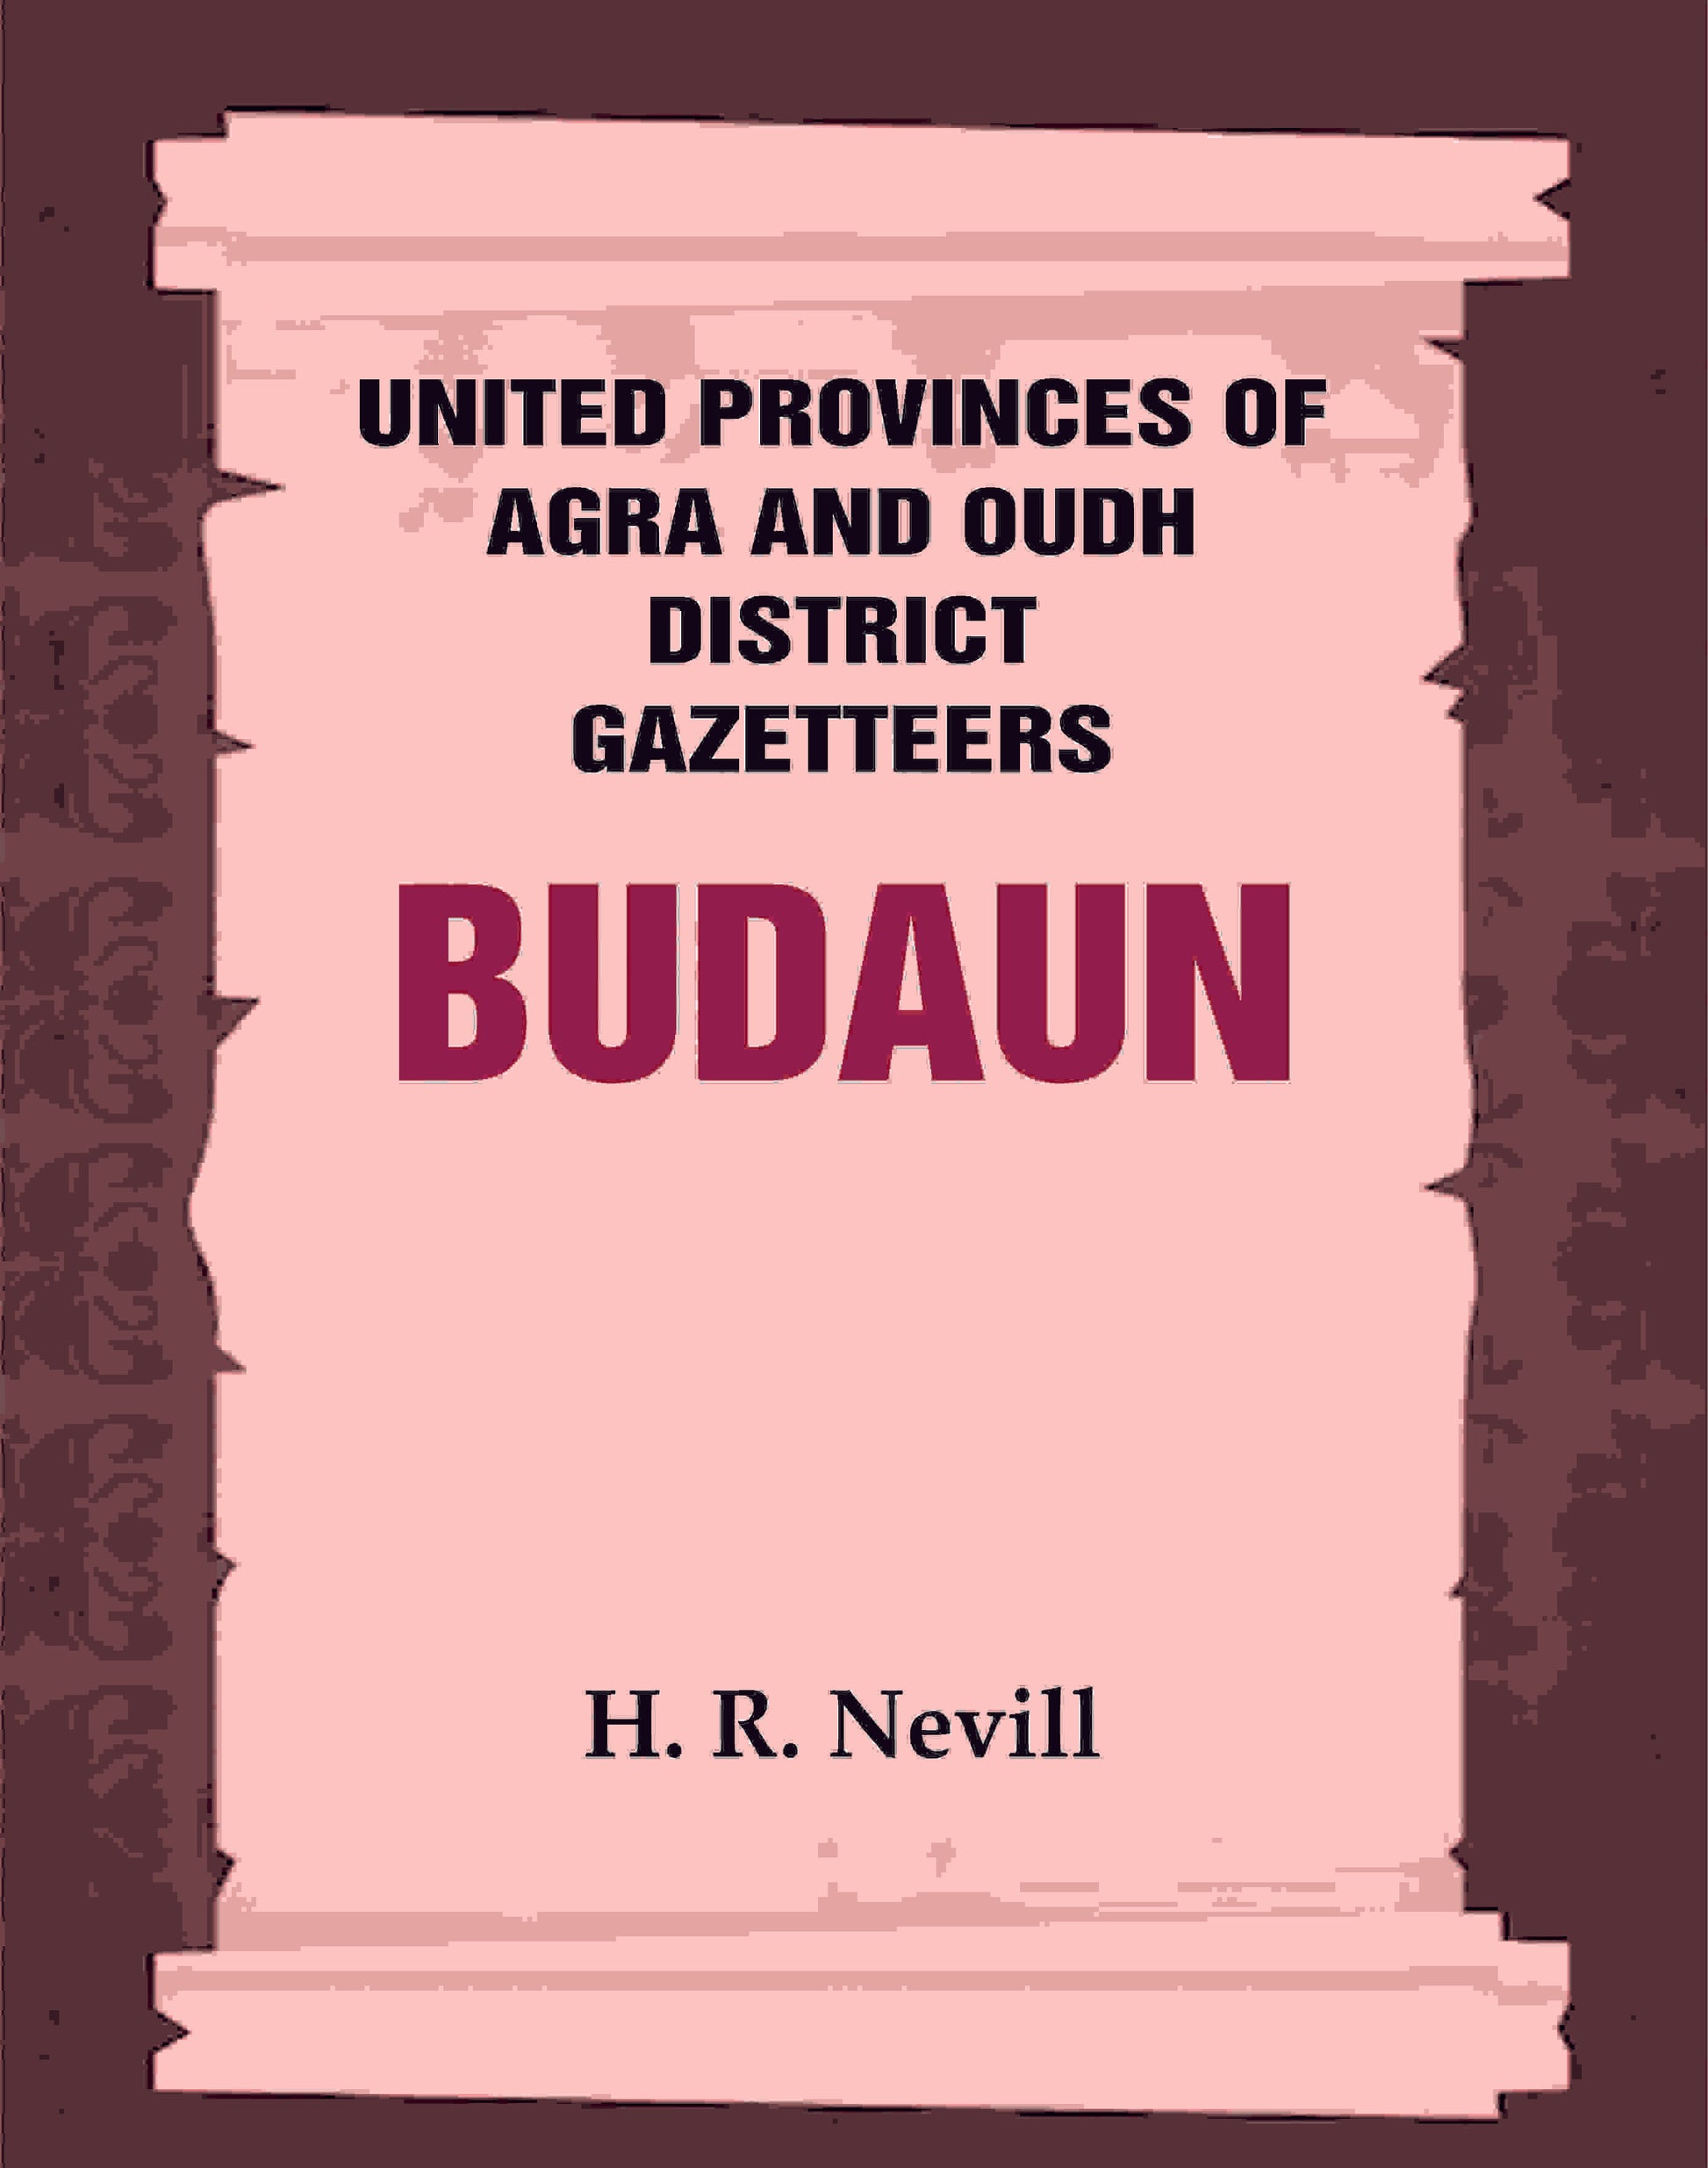 United Provinces of Agra and Oudh District Gazetteers: Budaun